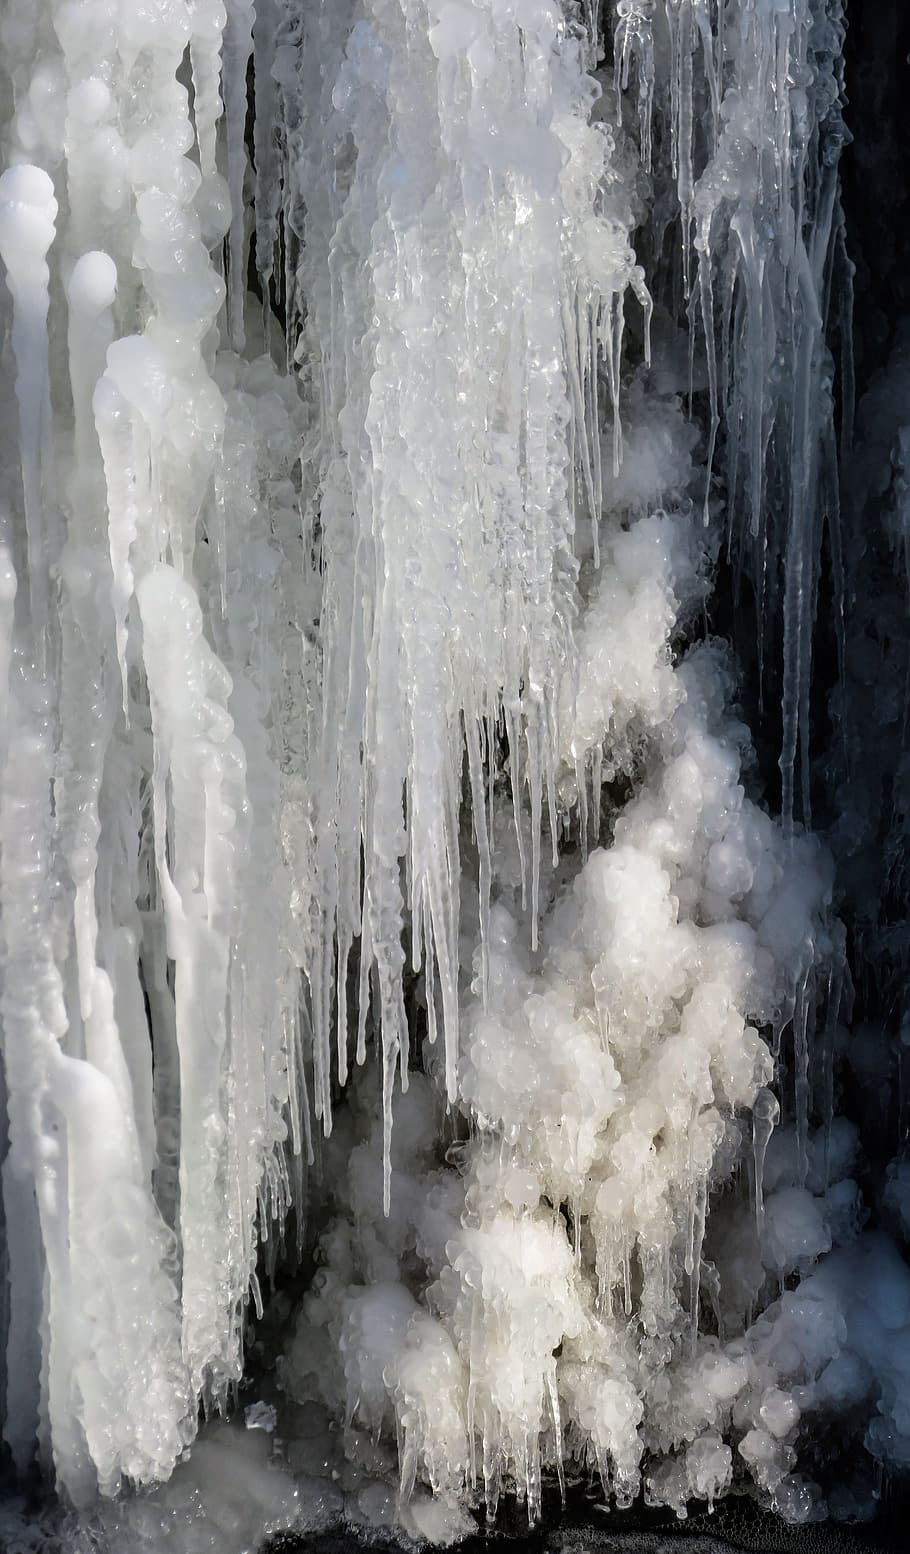 icicles ahead, nature, waters, waterfall, ice, winter, time of year, icicle, frozen, cold